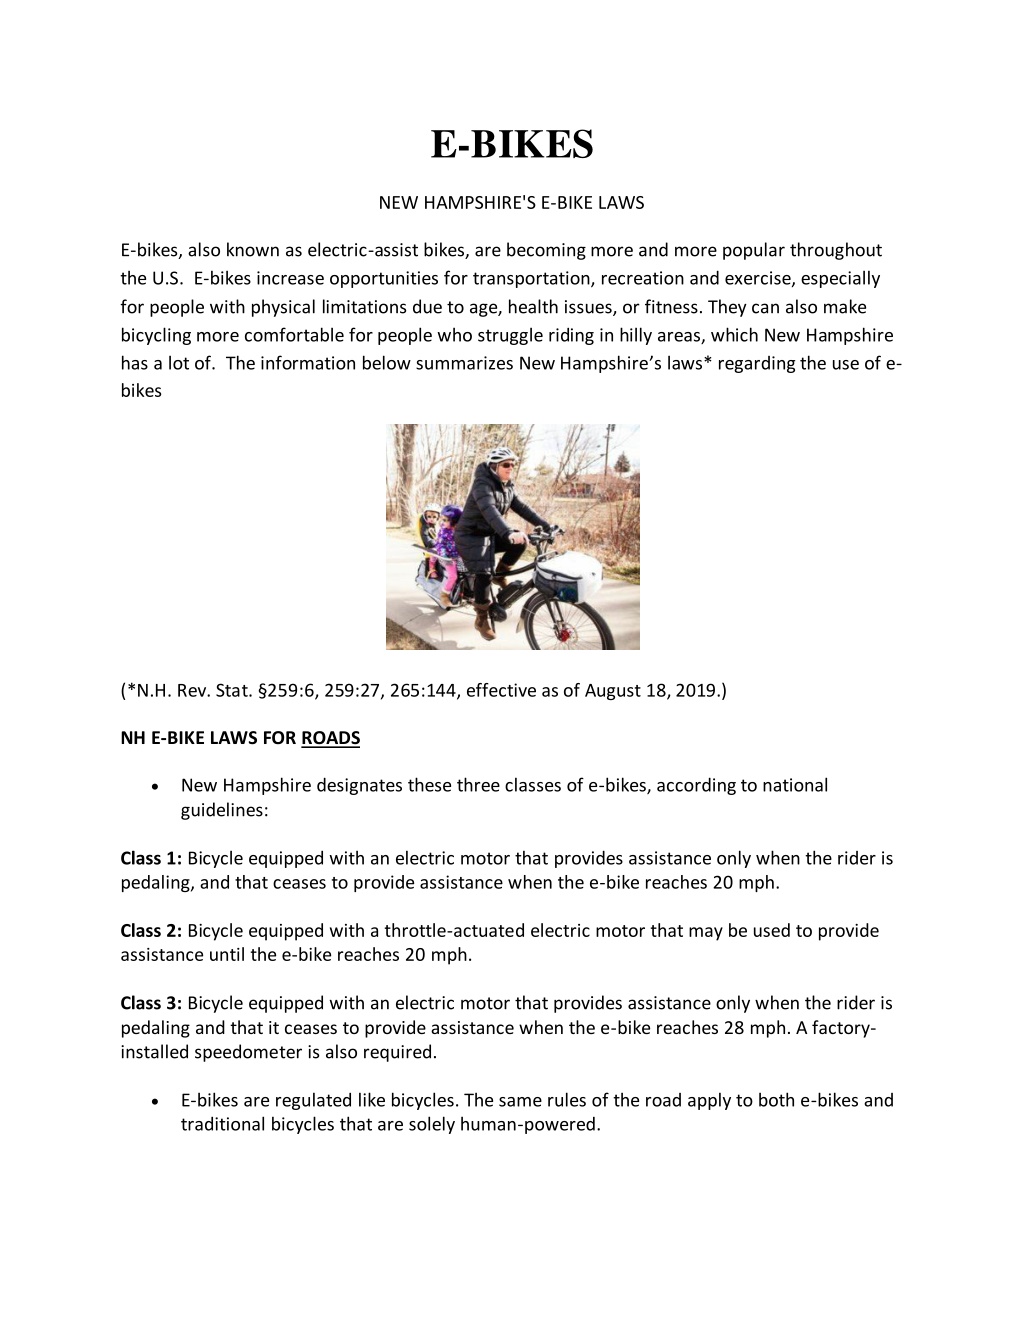 PPT - EBIKES PowerPoint Presentation, free download - ID:10621205